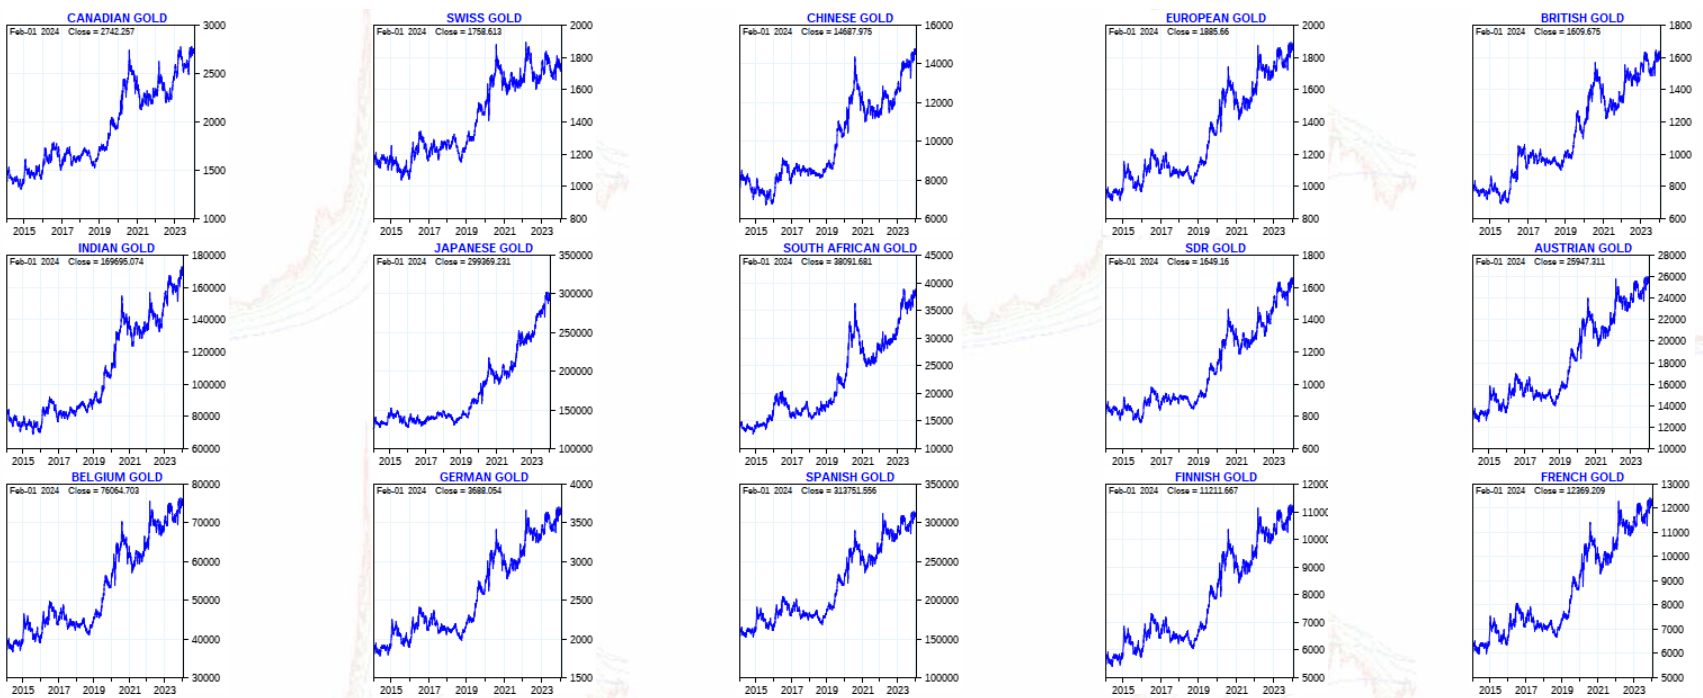 long term gold price charts world currencies